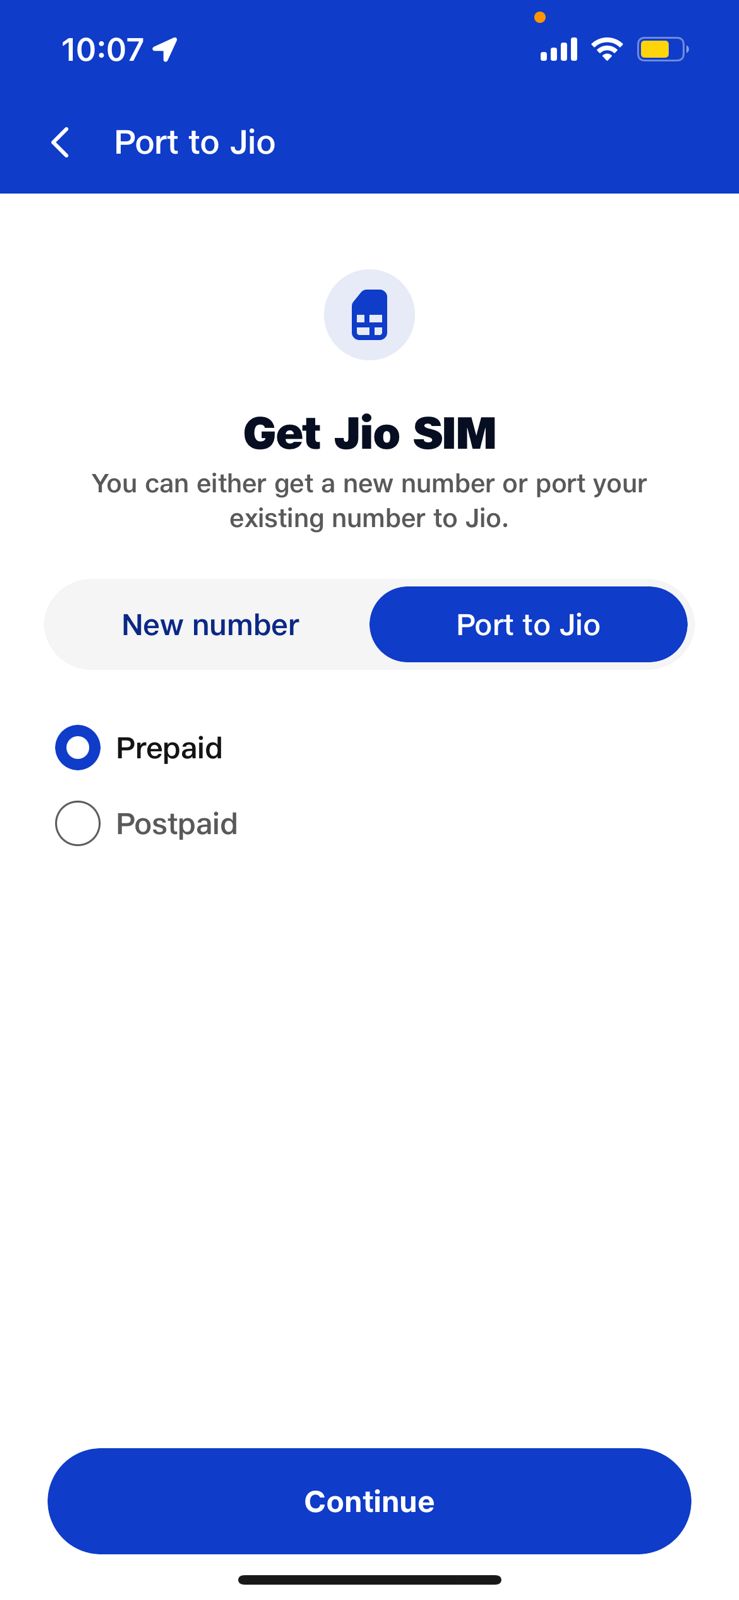 How to port Airtel to Jio